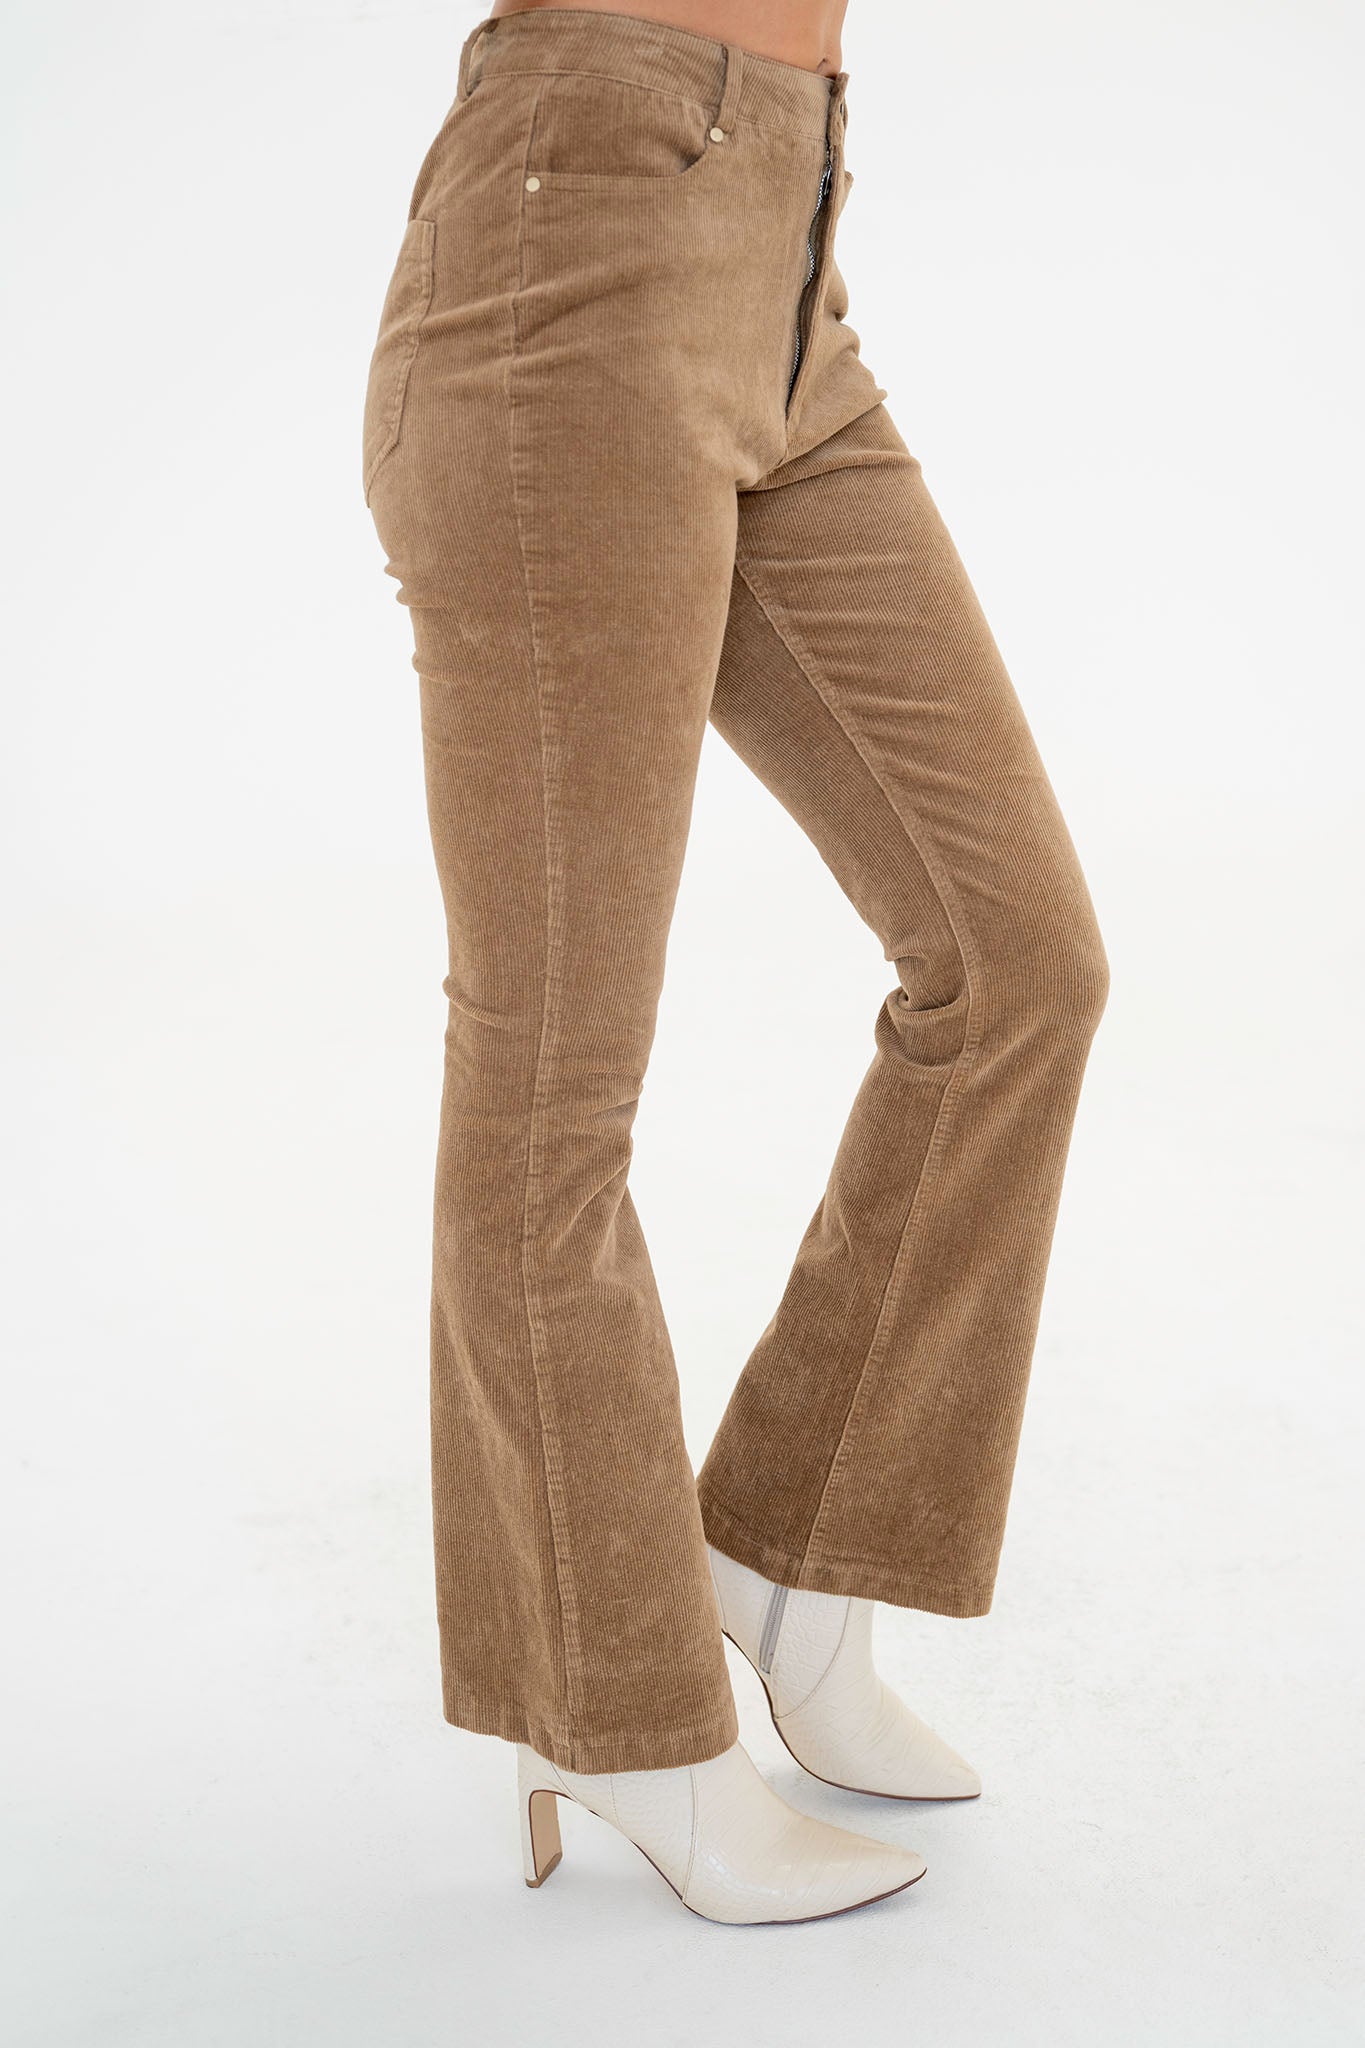 View 3 of Firefly Flared Corduroy Pants, a Pants from Larrea Cove. Detail: .